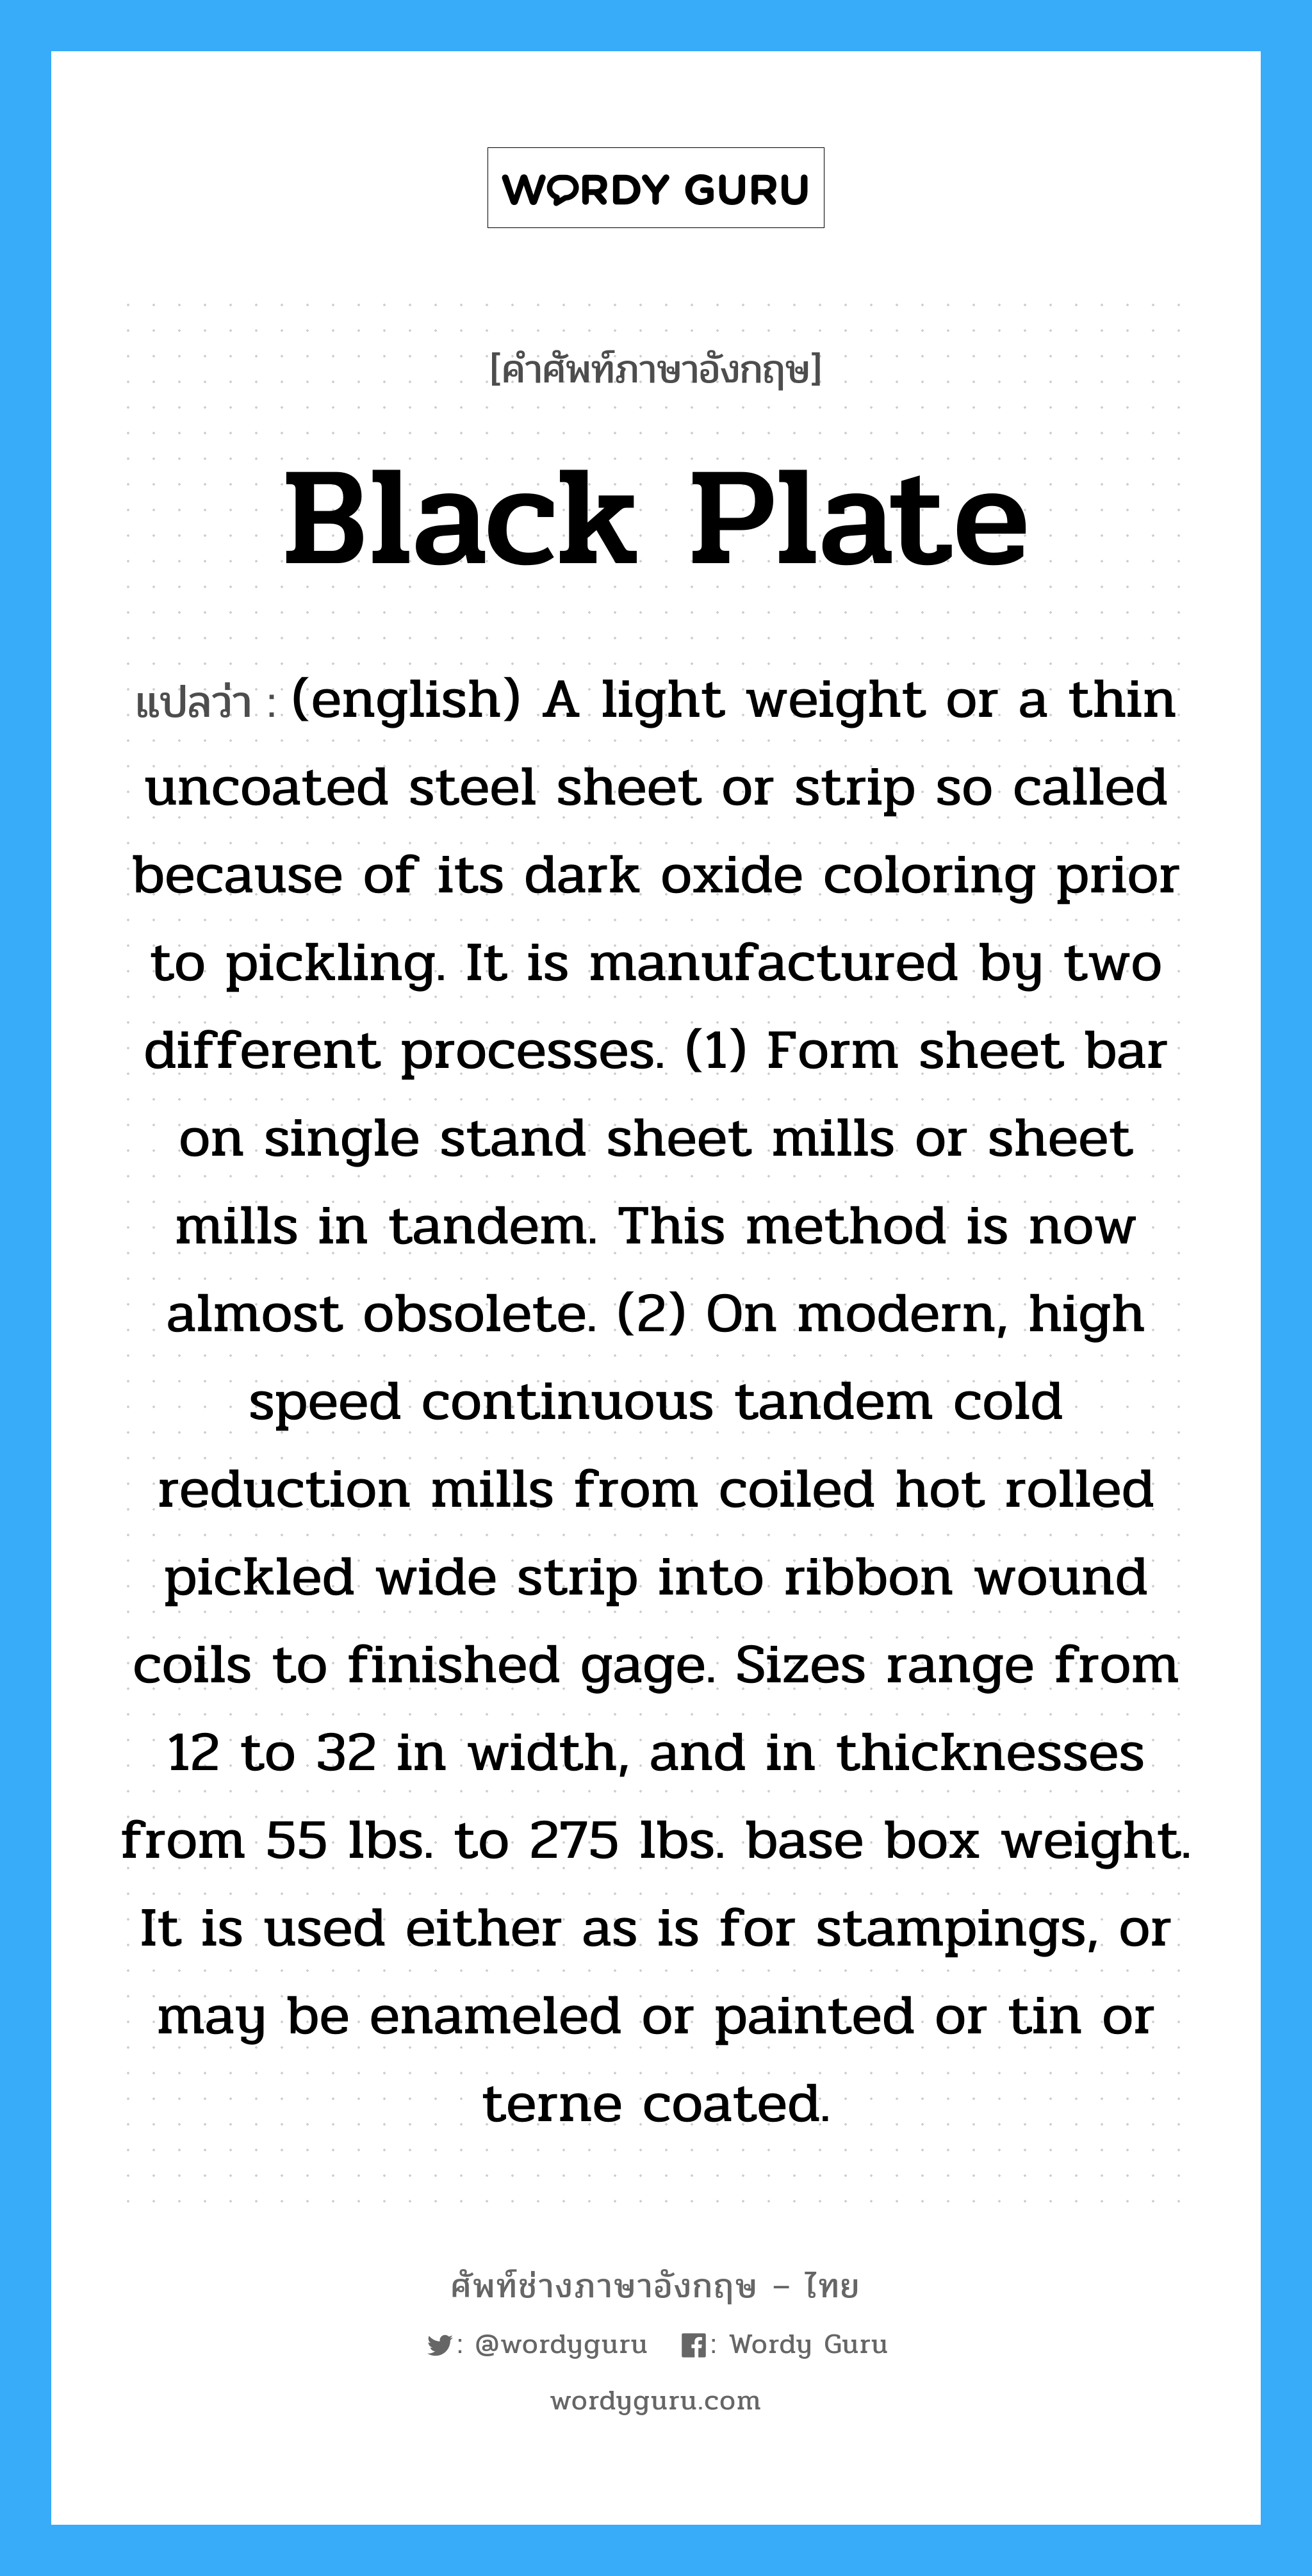 (english) A light weight or a thin uncoated steel sheet or strip so called because of its dark oxide coloring prior to pickling. It is manufactured by two different processes. (1) Form sheet bar on single stand sheet mills or sheet mills in tandem. This method is now almost obsolete. (2) On modern, high speed continuous tandem cold reduction mills from coiled hot rolled pickled wide strip into ribbon wound coils to finished gage. Sizes range from 12 to 32 in width, and in thicknesses from 55 lbs. to 275 lbs. base box weight. It is used either as is for stampings, or may be enameled or painted or tin or terne coated. ภาษาอังกฤษ?, คำศัพท์ช่างภาษาอังกฤษ - ไทย (english) A light weight or a thin uncoated steel sheet or strip so called because of its dark oxide coloring prior to pickling. It is manufactured by two different processes. (1) Form sheet bar on single stand sheet mills or sheet mills in tandem. This method is now almost obsolete. (2) On modern, high speed continuous tandem cold reduction mills from coiled hot rolled pickled wide strip into ribbon wound coils to finished gage. Sizes range from 12 to 32 in width, and in thicknesses from 55 lbs. to 275 lbs. base box weight. It is used either as is for stampings, or may be enameled or painted or tin or terne coated. คำศัพท์ภาษาอังกฤษ (english) A light weight or a thin uncoated steel sheet or strip so called because of its dark oxide coloring prior to pickling. It is manufactured by two different processes. (1) Form sheet bar on single stand sheet mills or sheet mills in tandem. This method is now almost obsolete. (2) On modern, high speed continuous tandem cold reduction mills from coiled hot rolled pickled wide strip into ribbon wound coils to finished gage. Sizes range from 12 to 32 in width, and in thicknesses from 55 lbs. to 275 lbs. base box weight. It is used either as is for stampings, or may be enameled or painted or tin or terne coated. แปลว่า Black Plate